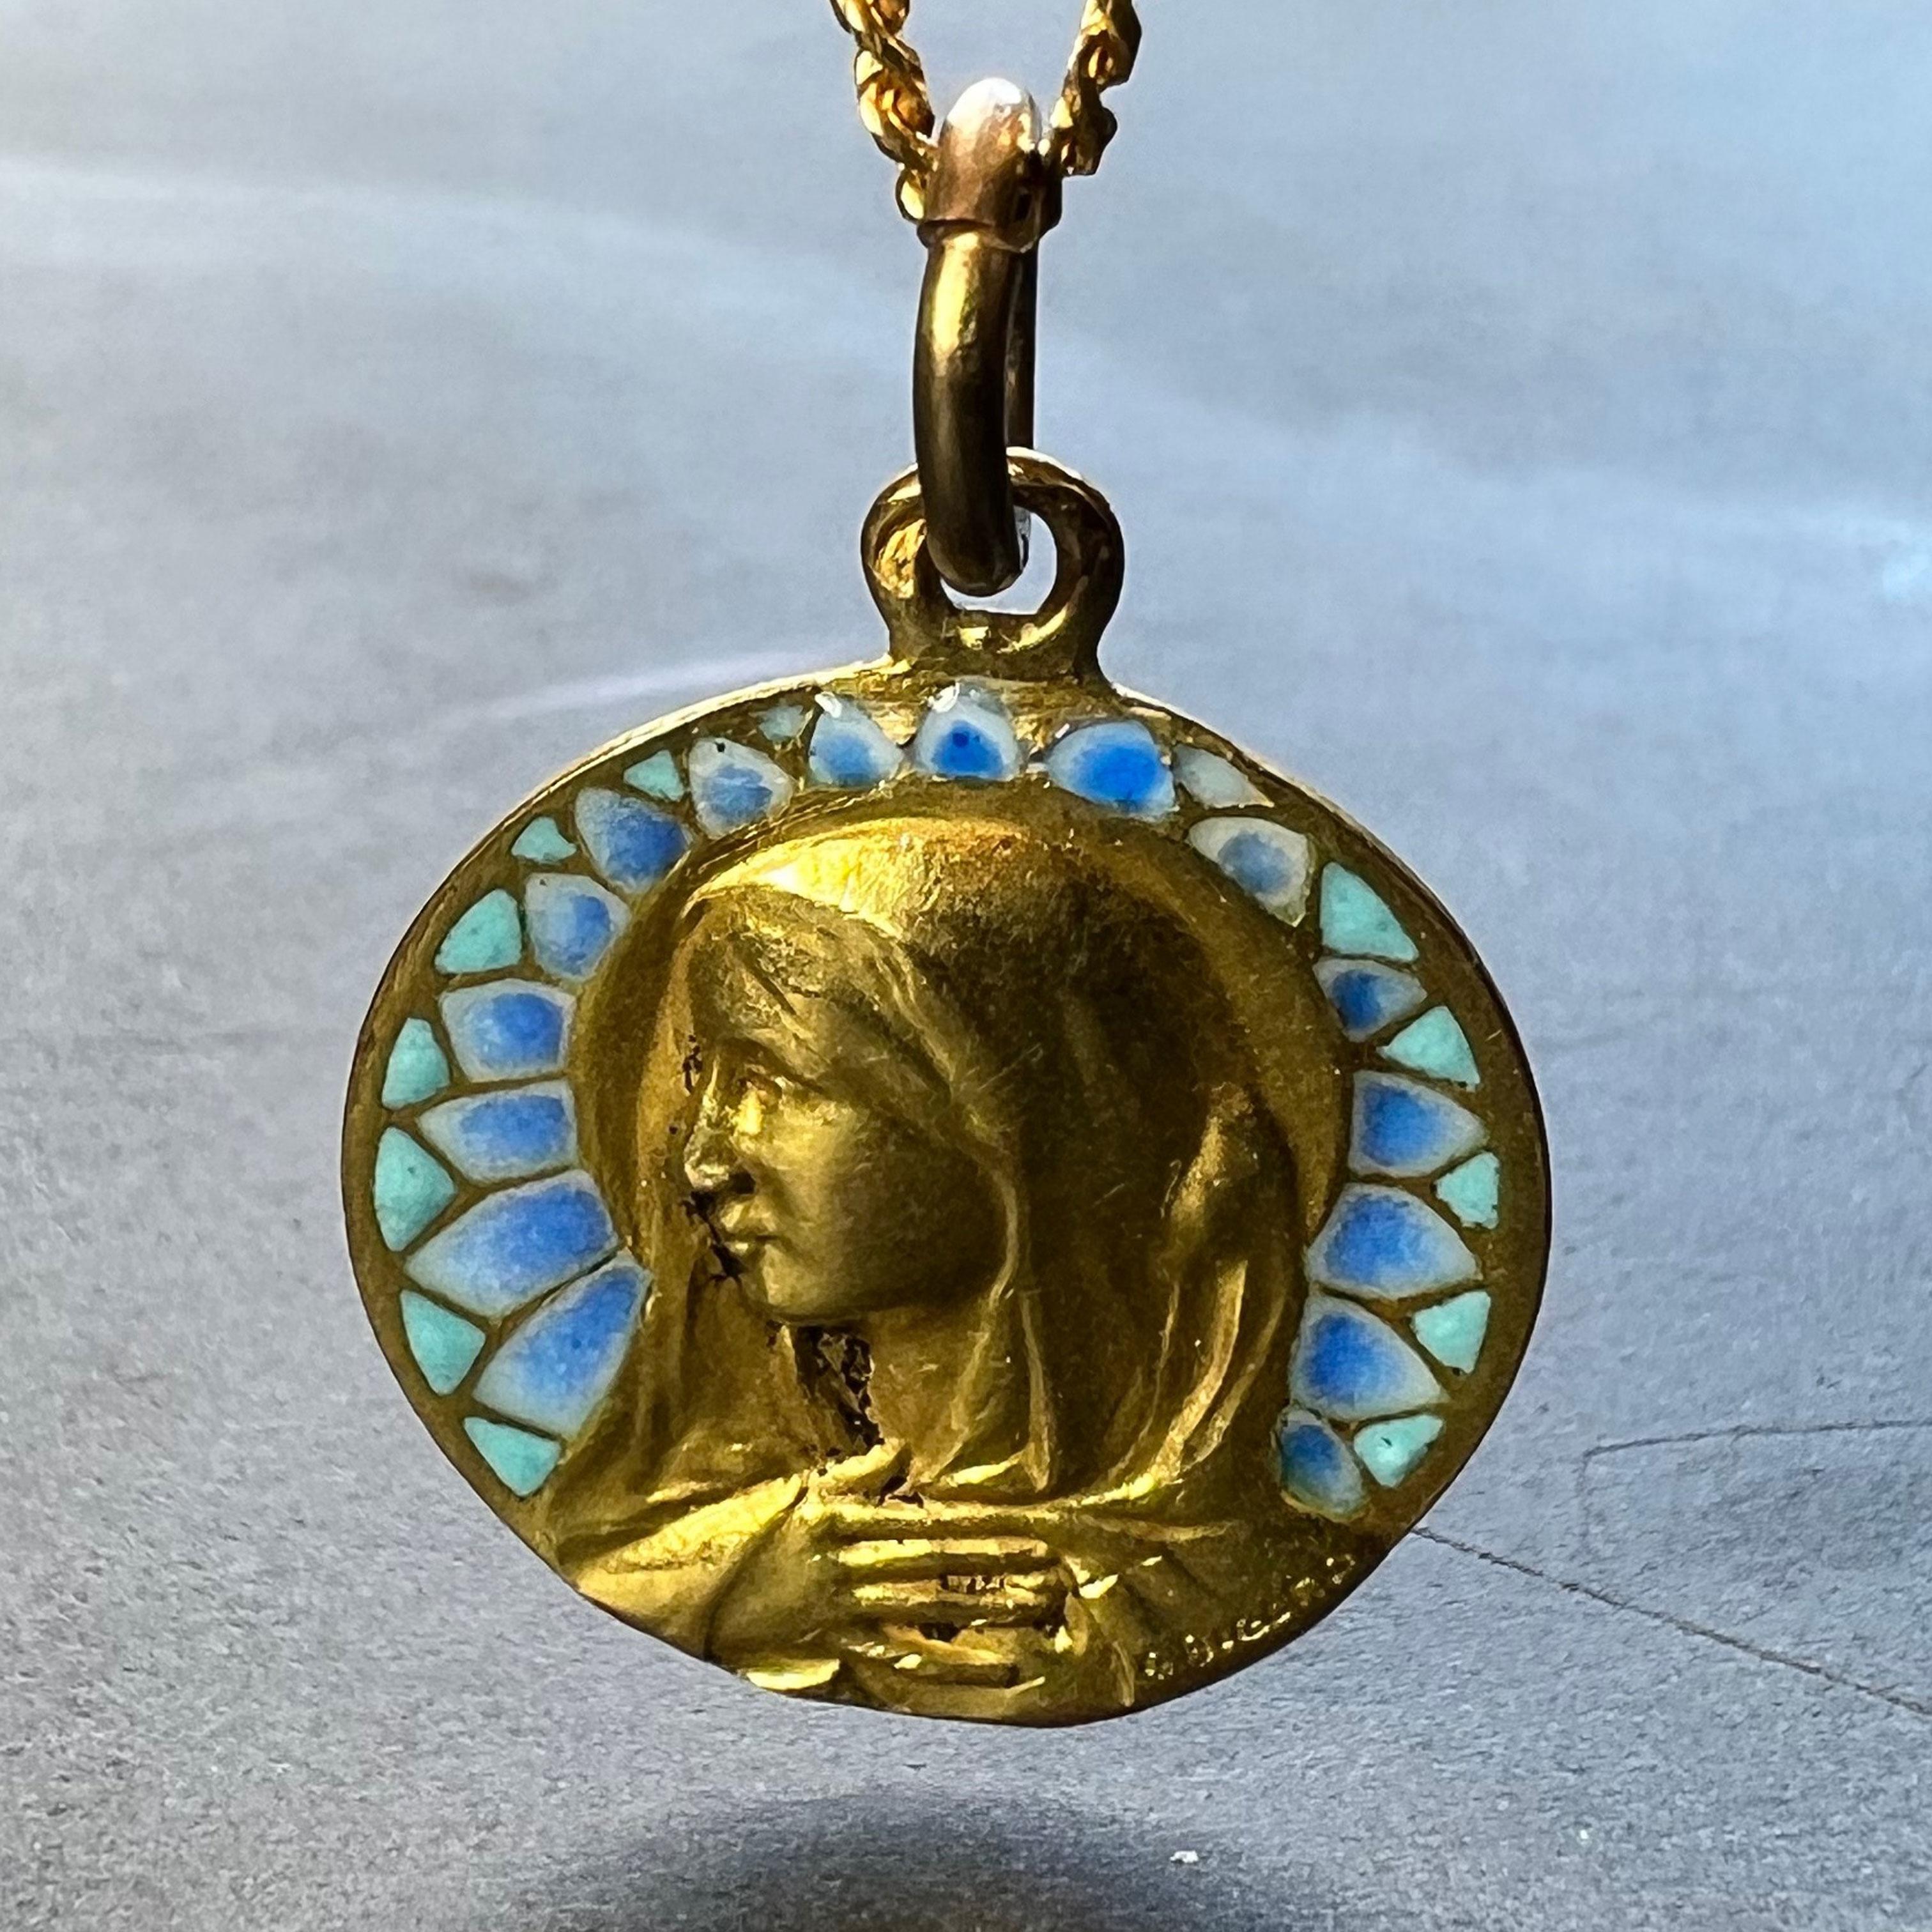 A French 18 karat (18K) yellow gold charm pendant designed as a round medal depicting the Virgin Mary with plique a jour turquoise and blue graduated enamel surround. Signed G Bigard, stamped with the eagle’s head for 18 karat gold and French